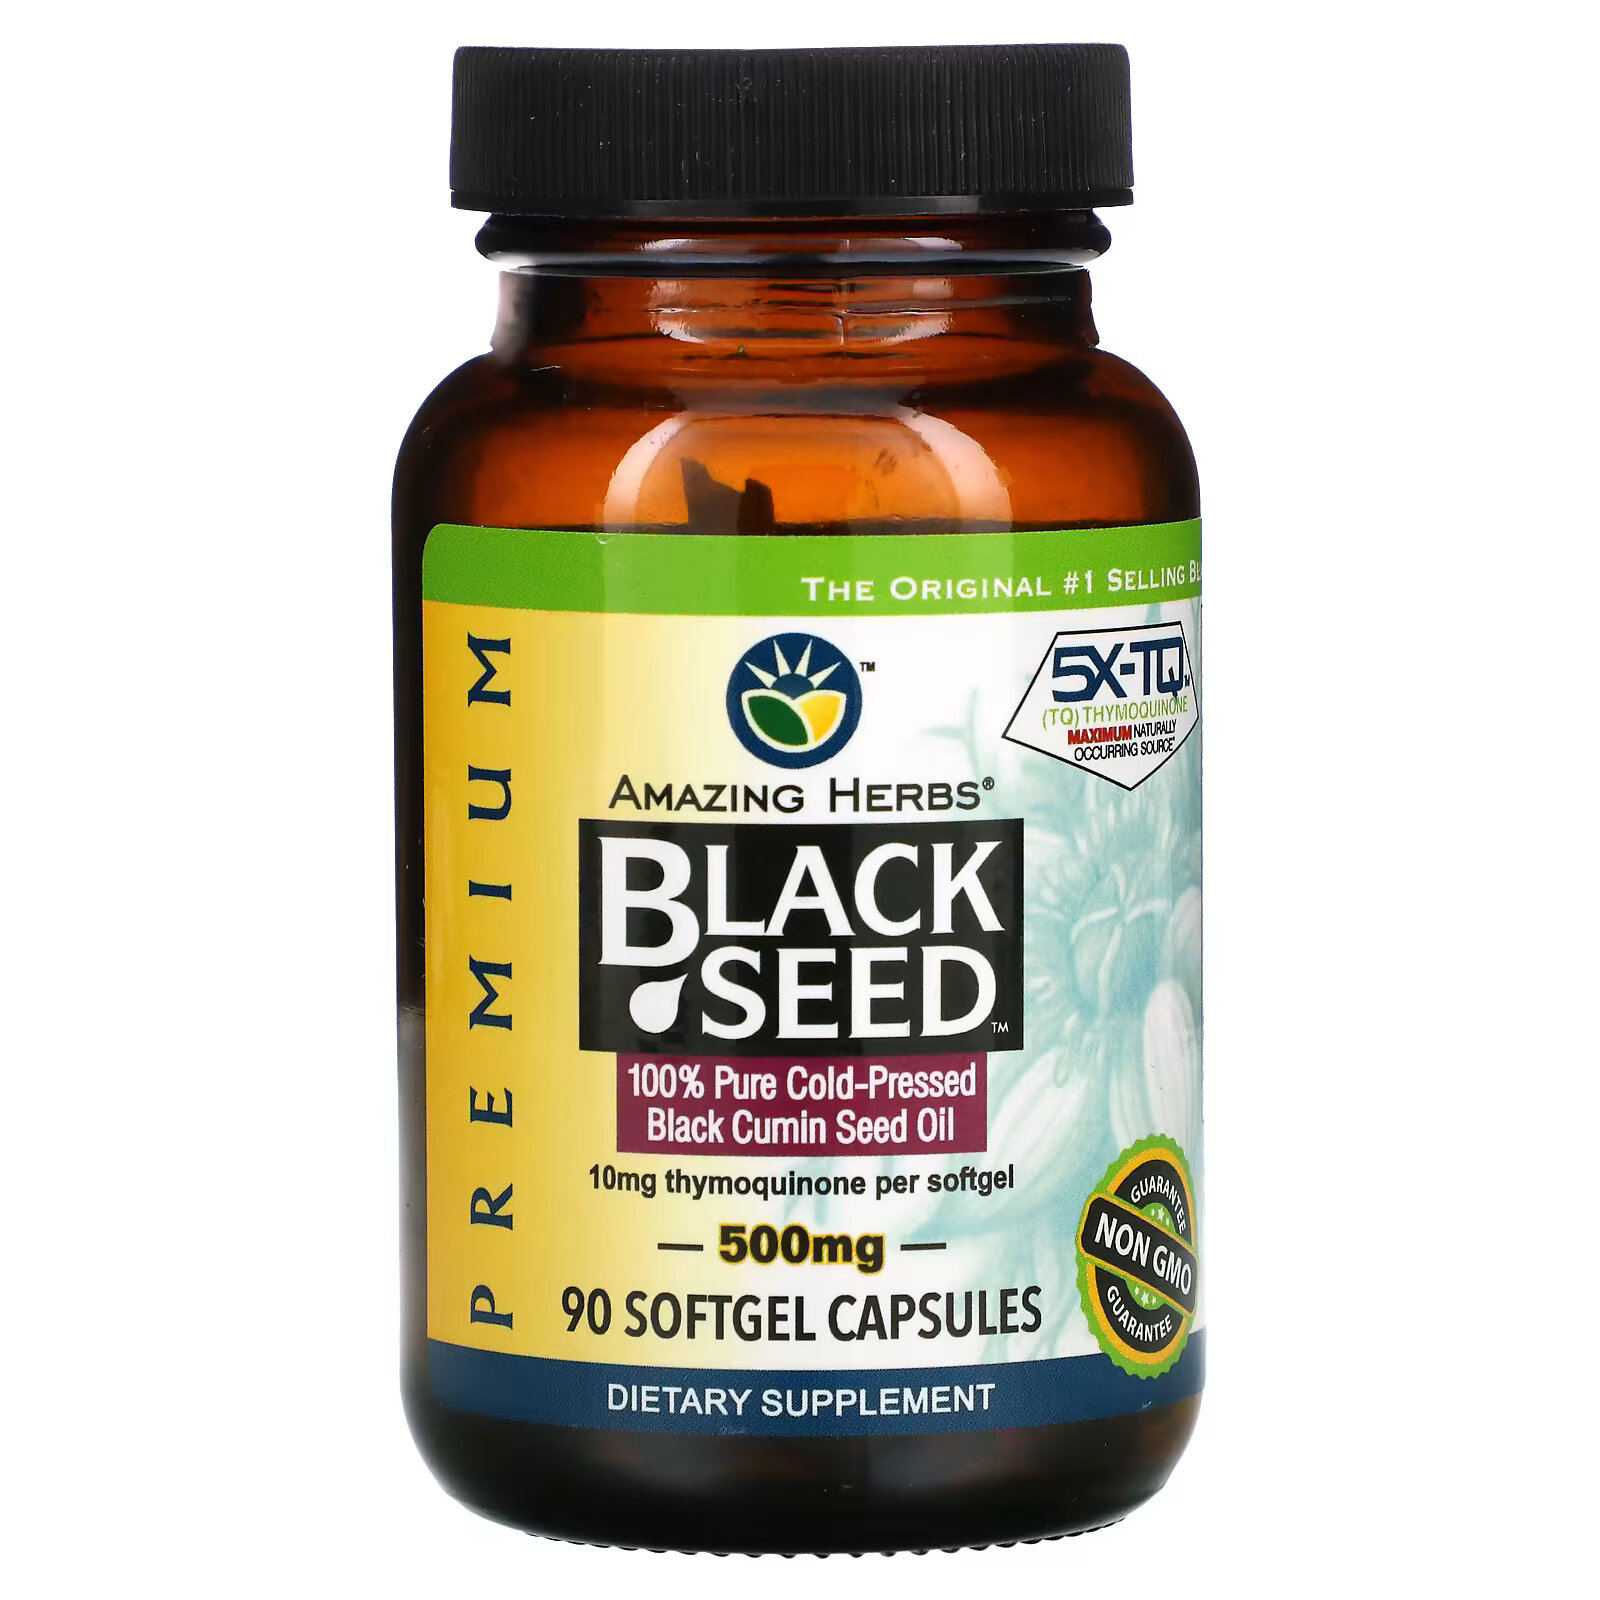 Amazing Herbs, Black Seed, 500 мг, 90 гелевых капсул amazing herbs black seed 500 мг 90 гелевых капсул